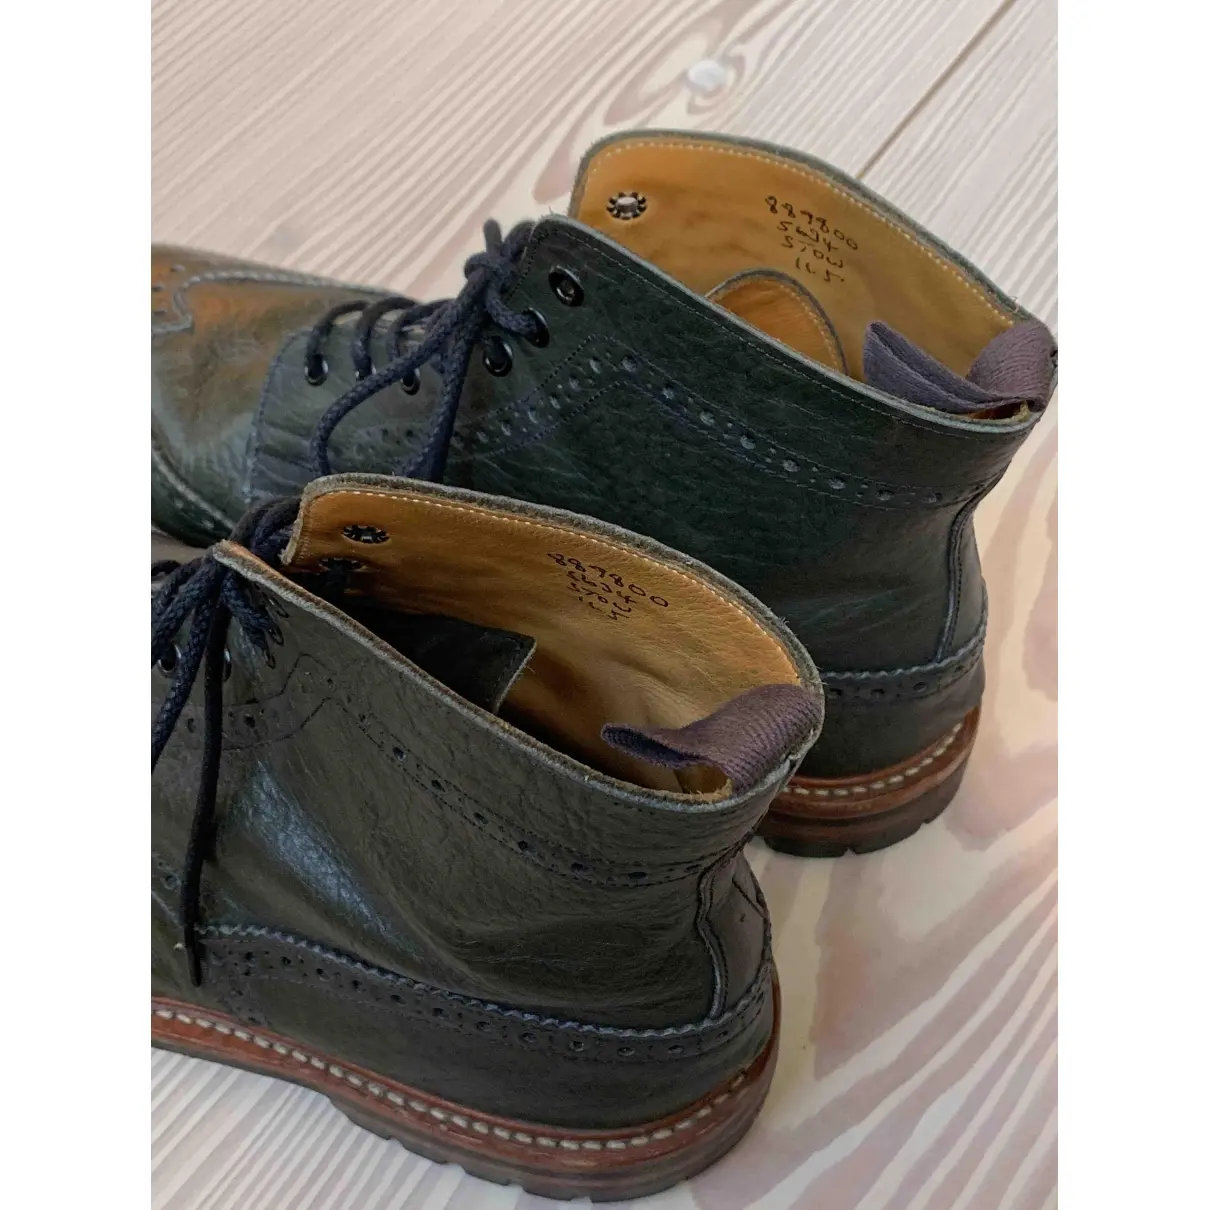 Buy Trickers London Leather boots online